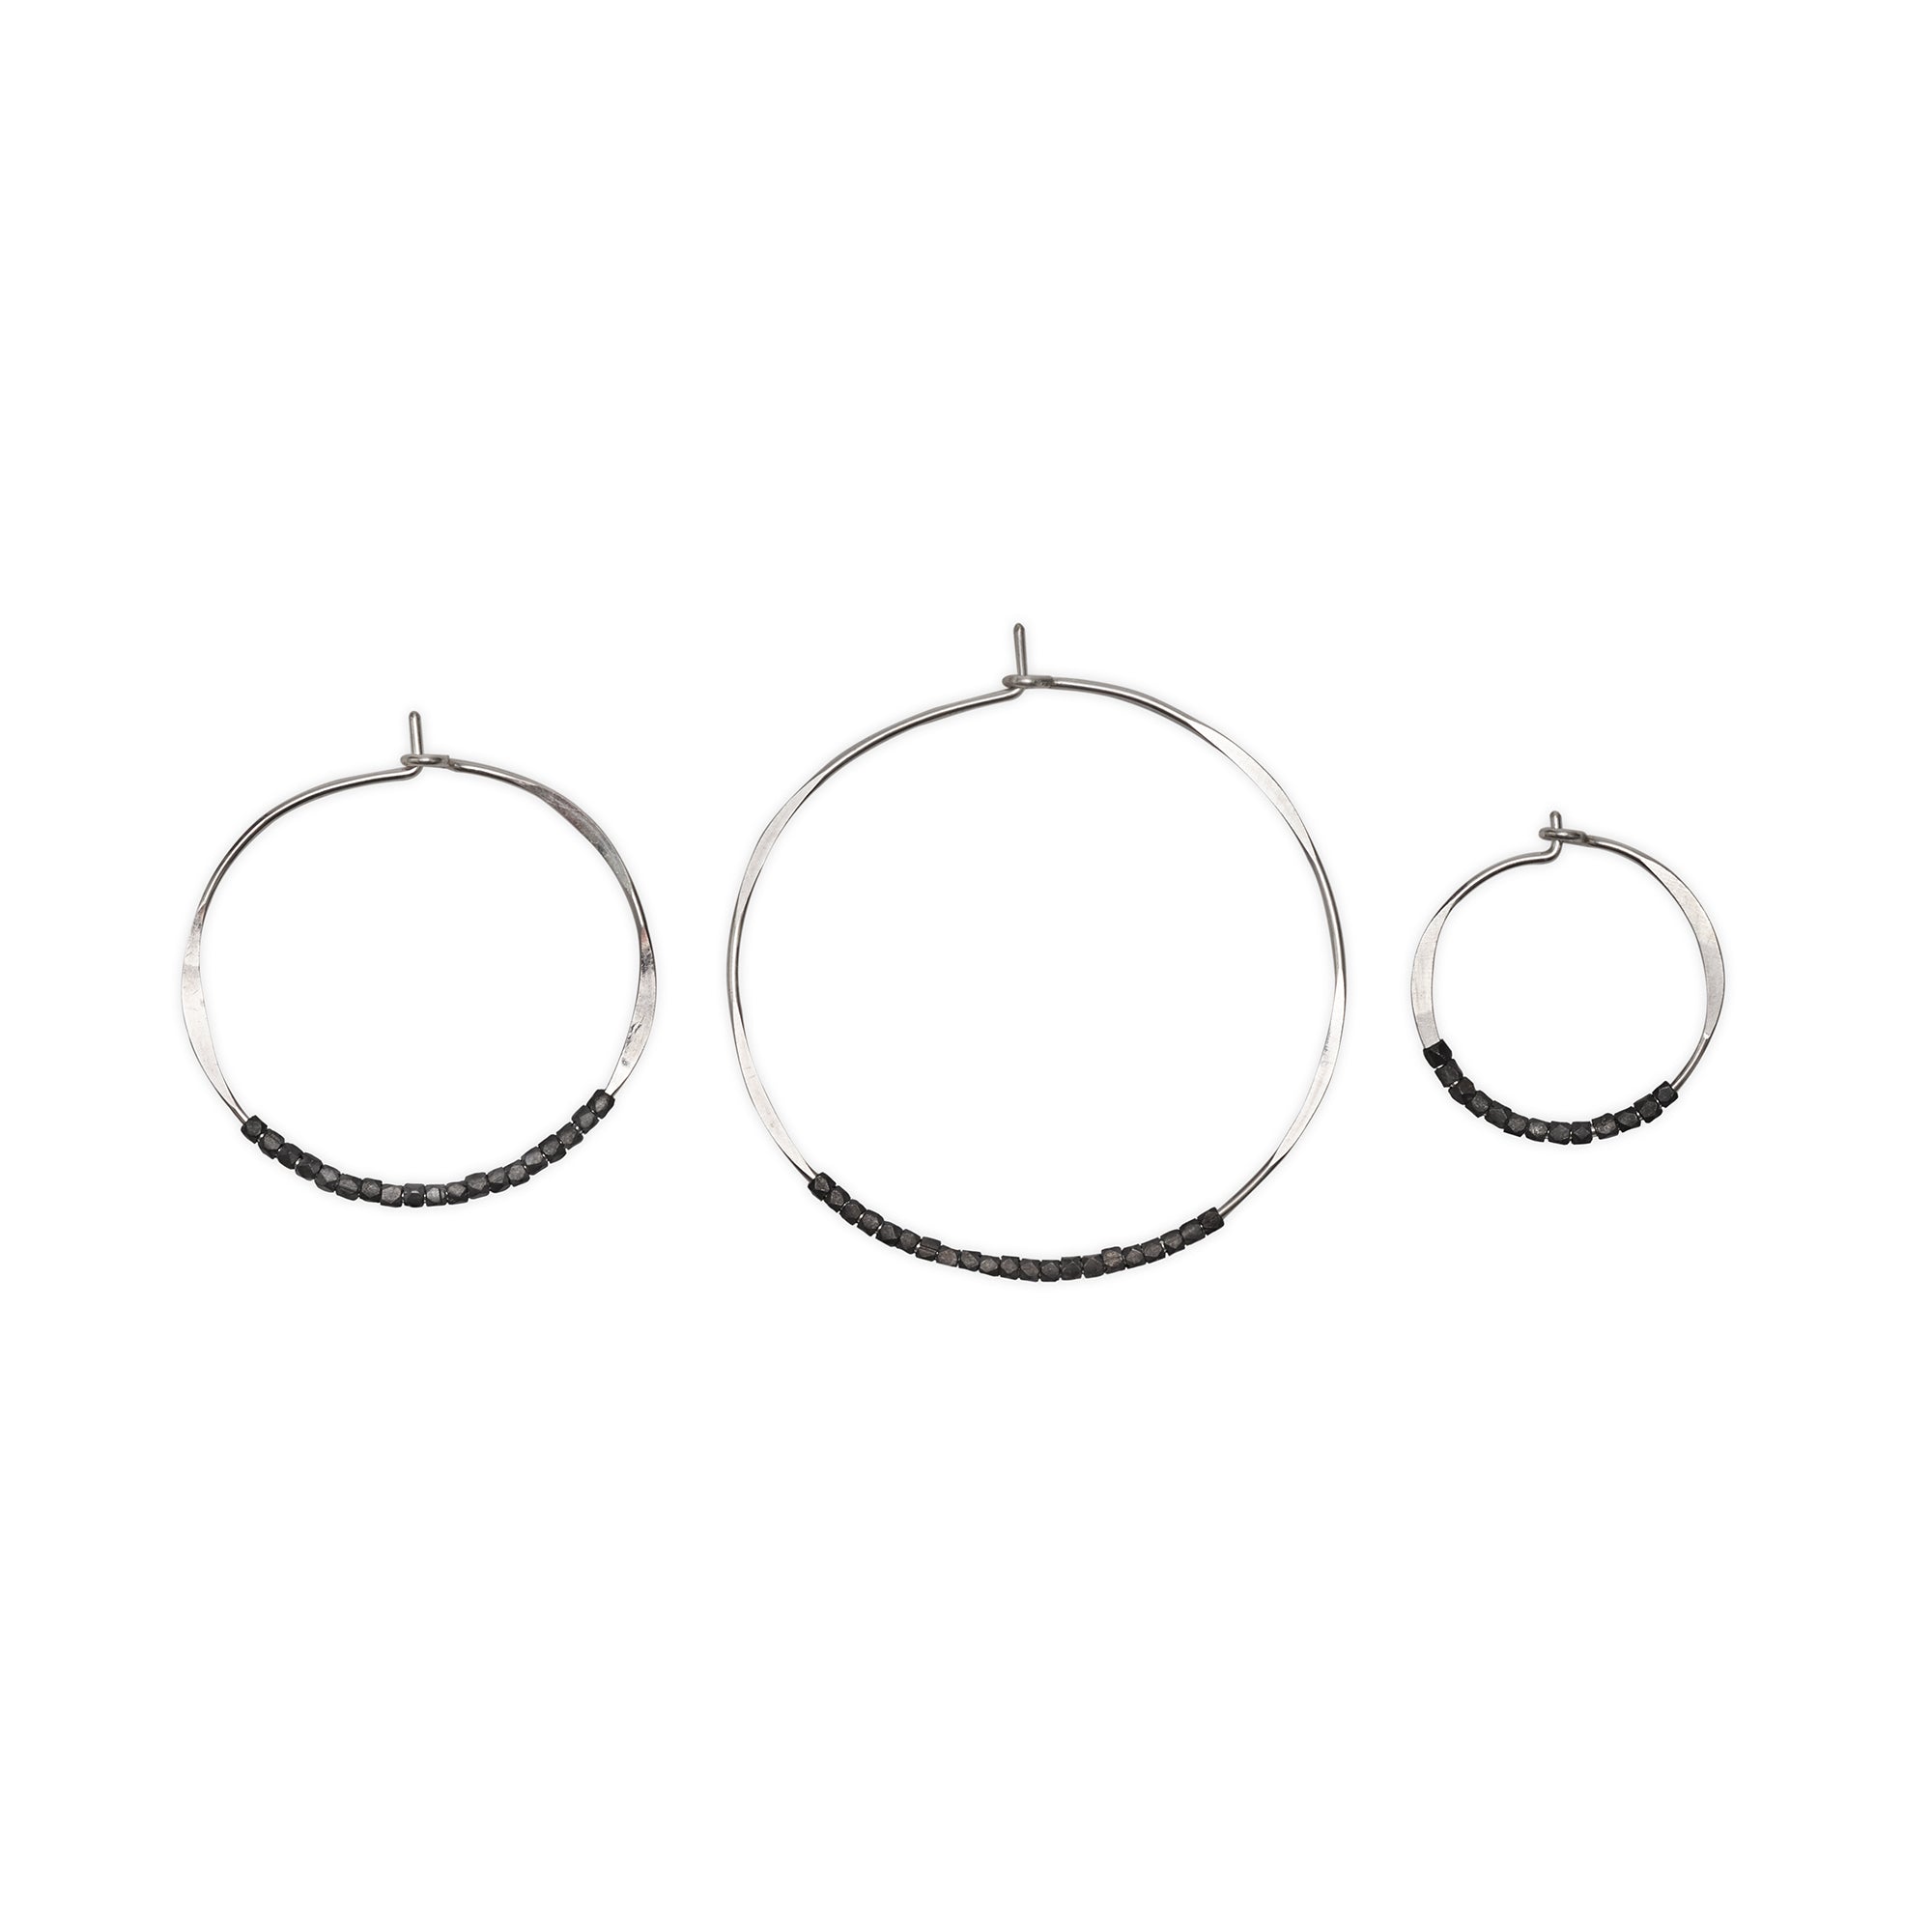 These Bead Hoop Earrings are embellished with delicate sterling silver beads, making them effortless and eye catching